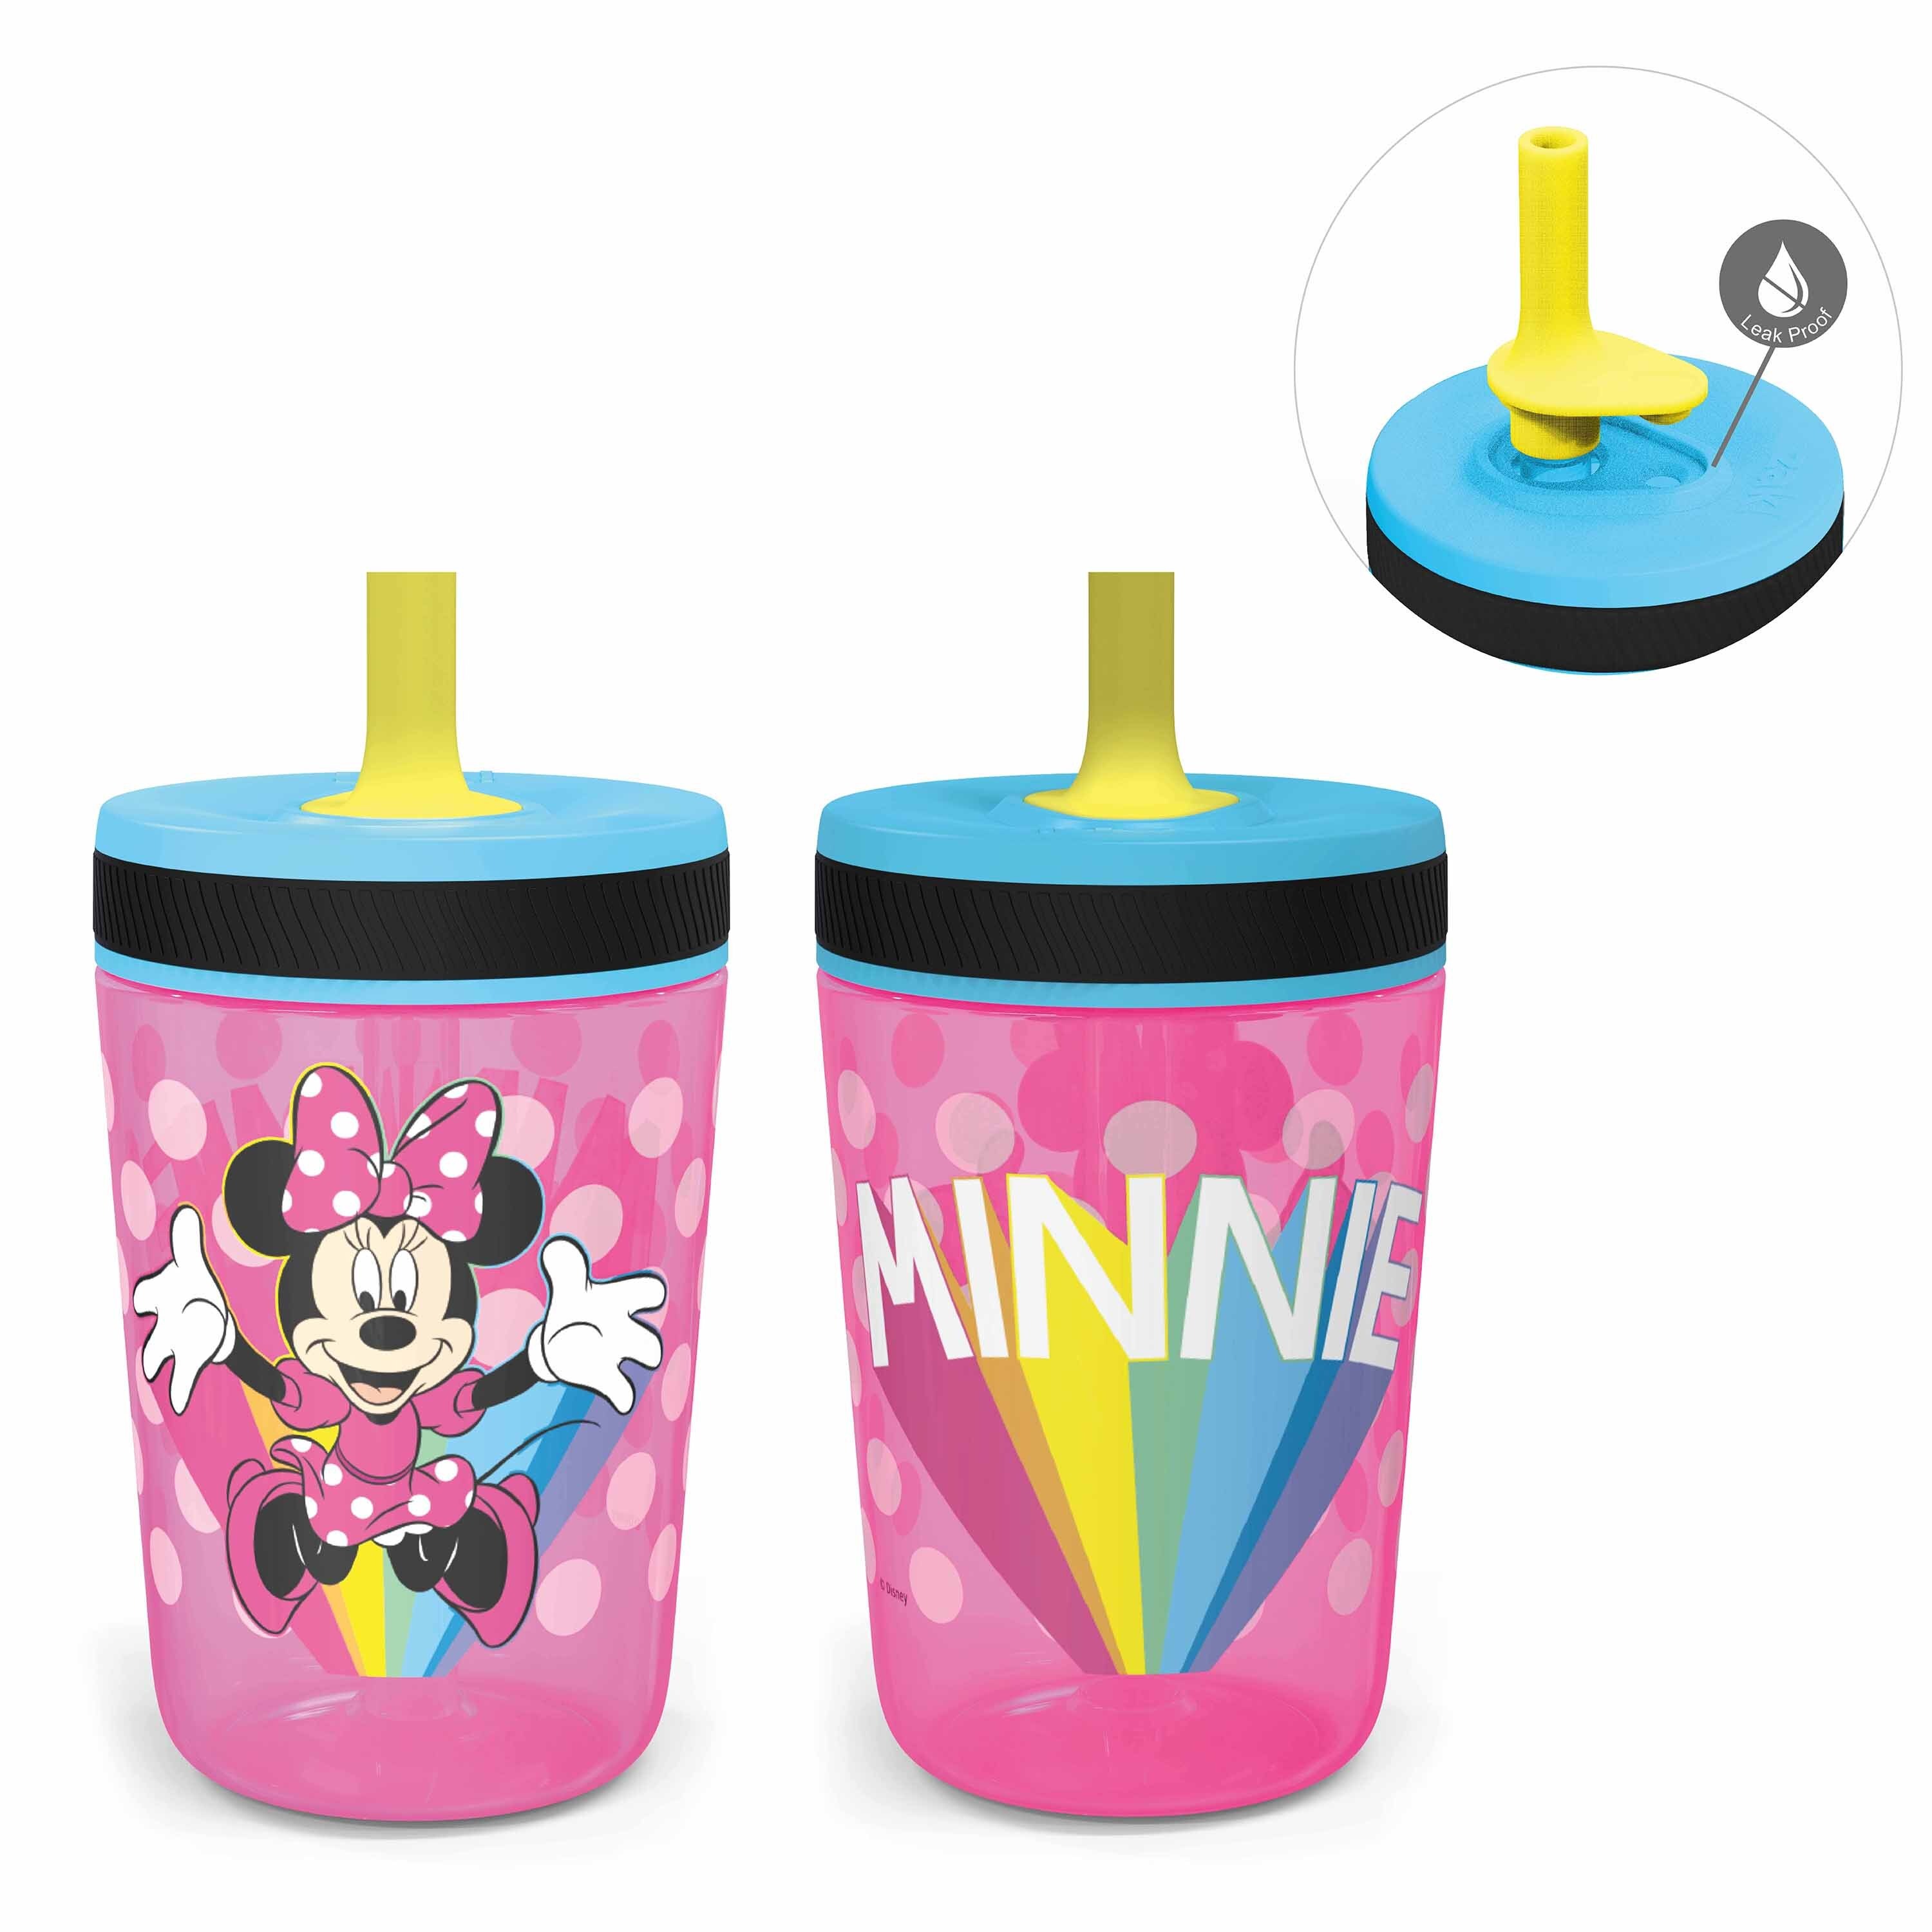 DISNEY MINNIE MOUSE 180ML ZAK DESIGNS SNAP SNACK CONTAINER 